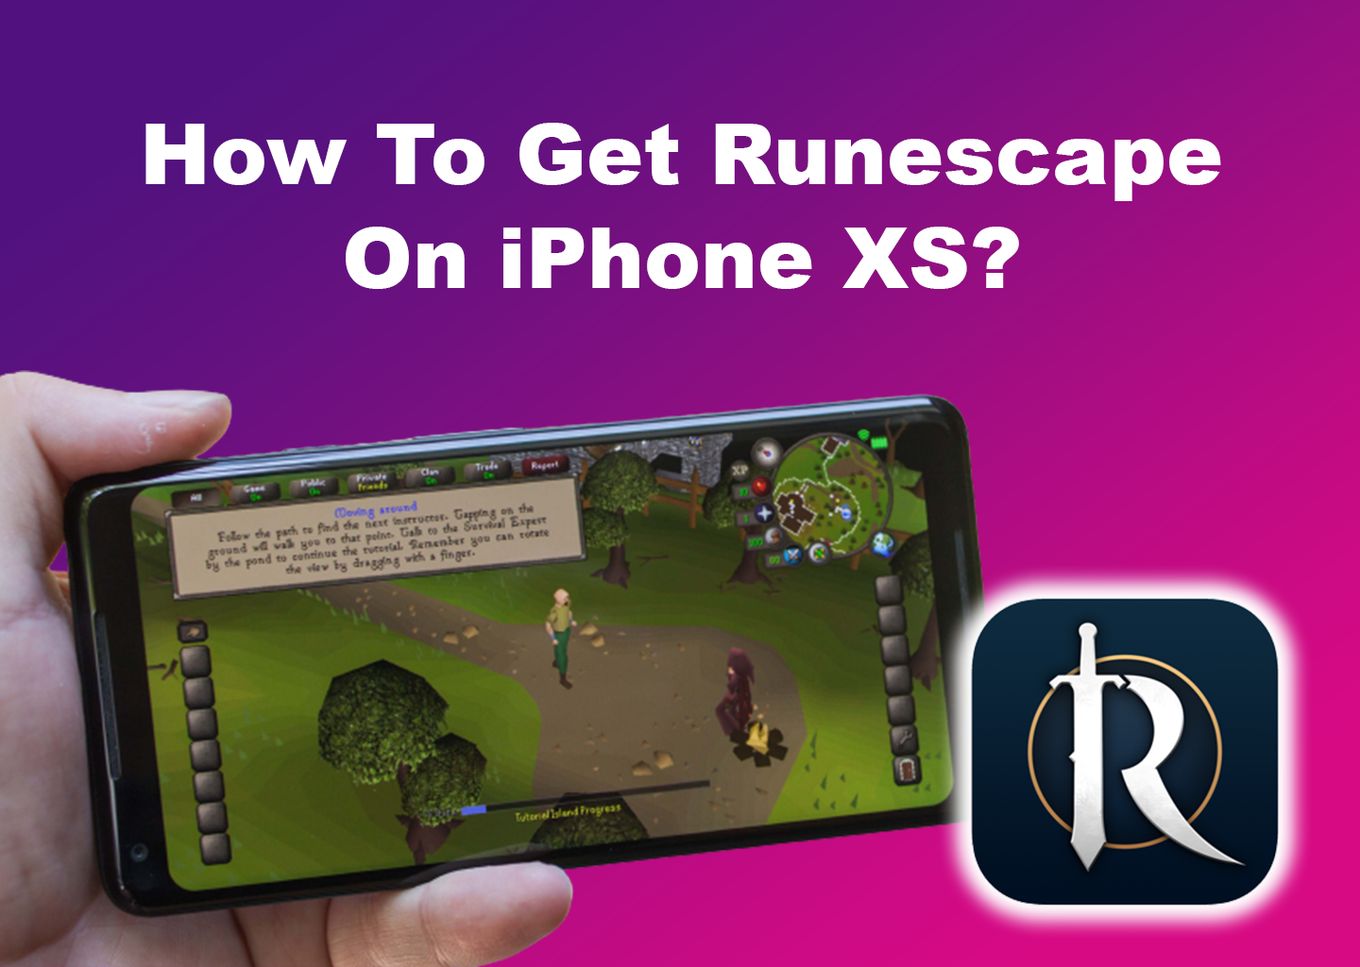 How to Get Runescape on iPhone XS